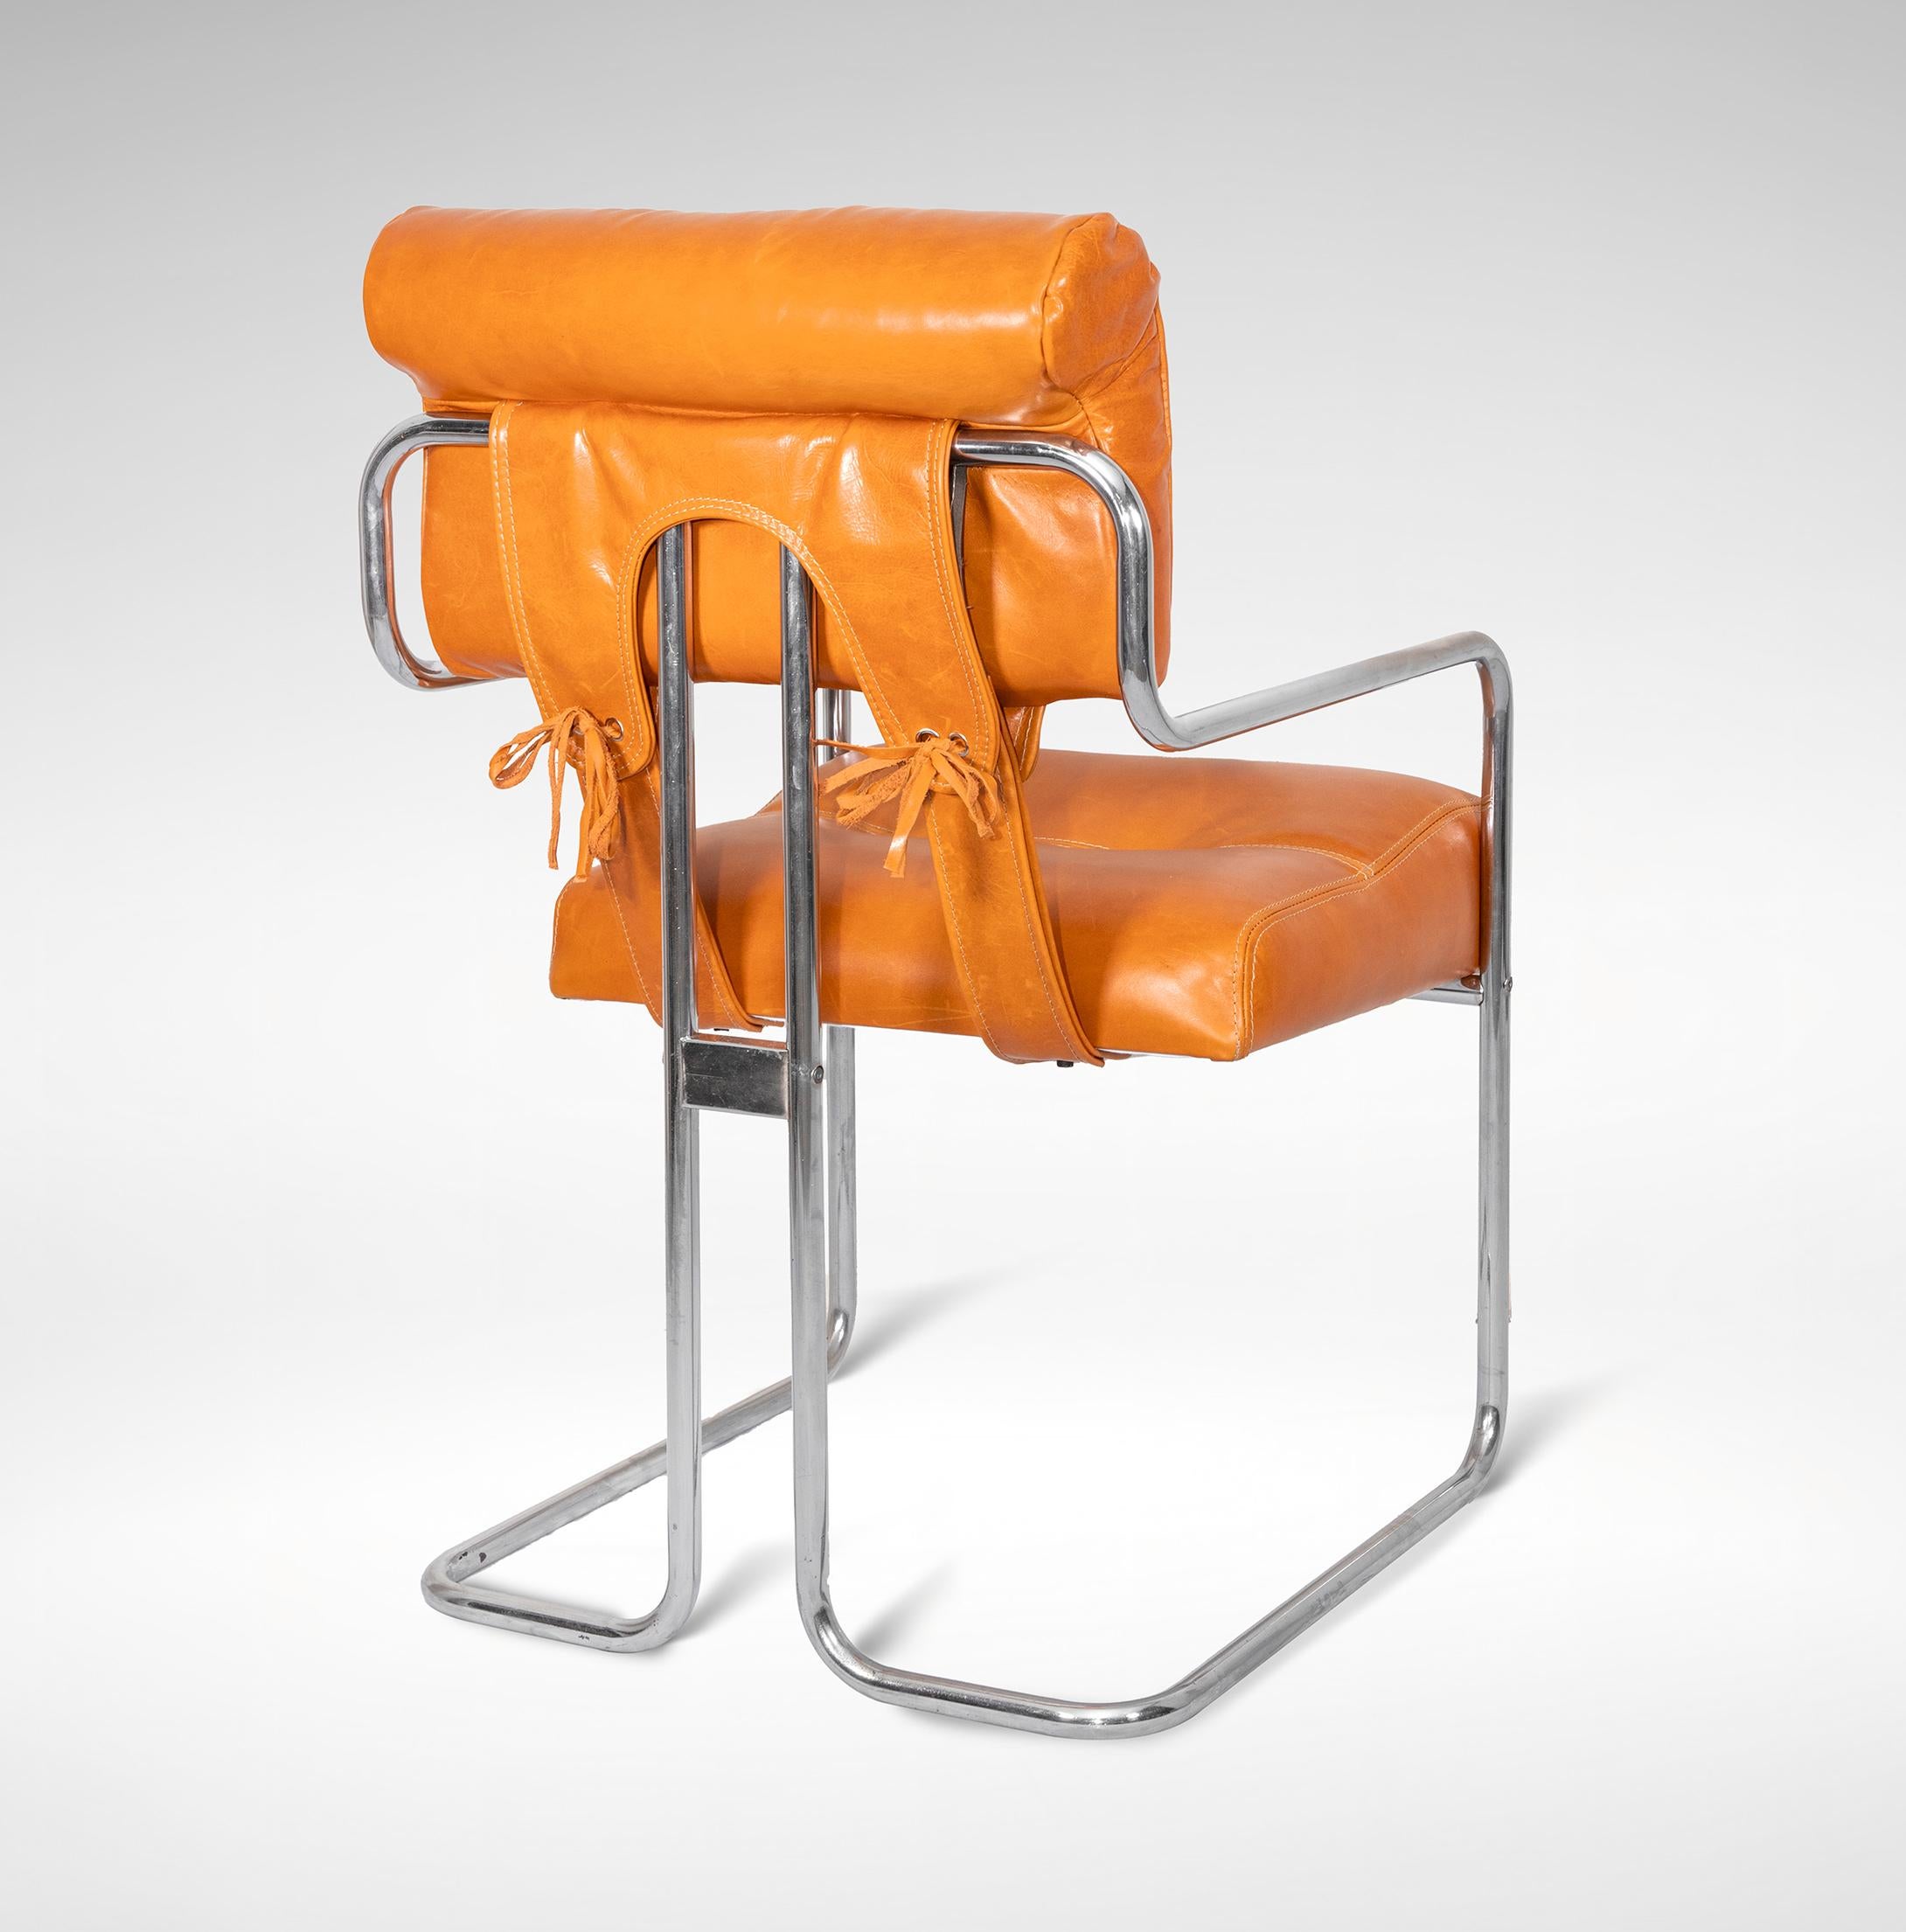 Iconic set of 8 vintage chairs by Guido Faleschini for I4 Mariani, Italy 1970s.
Chromed tubular steel and orange leather.
Very rare.
Excellent condition.

